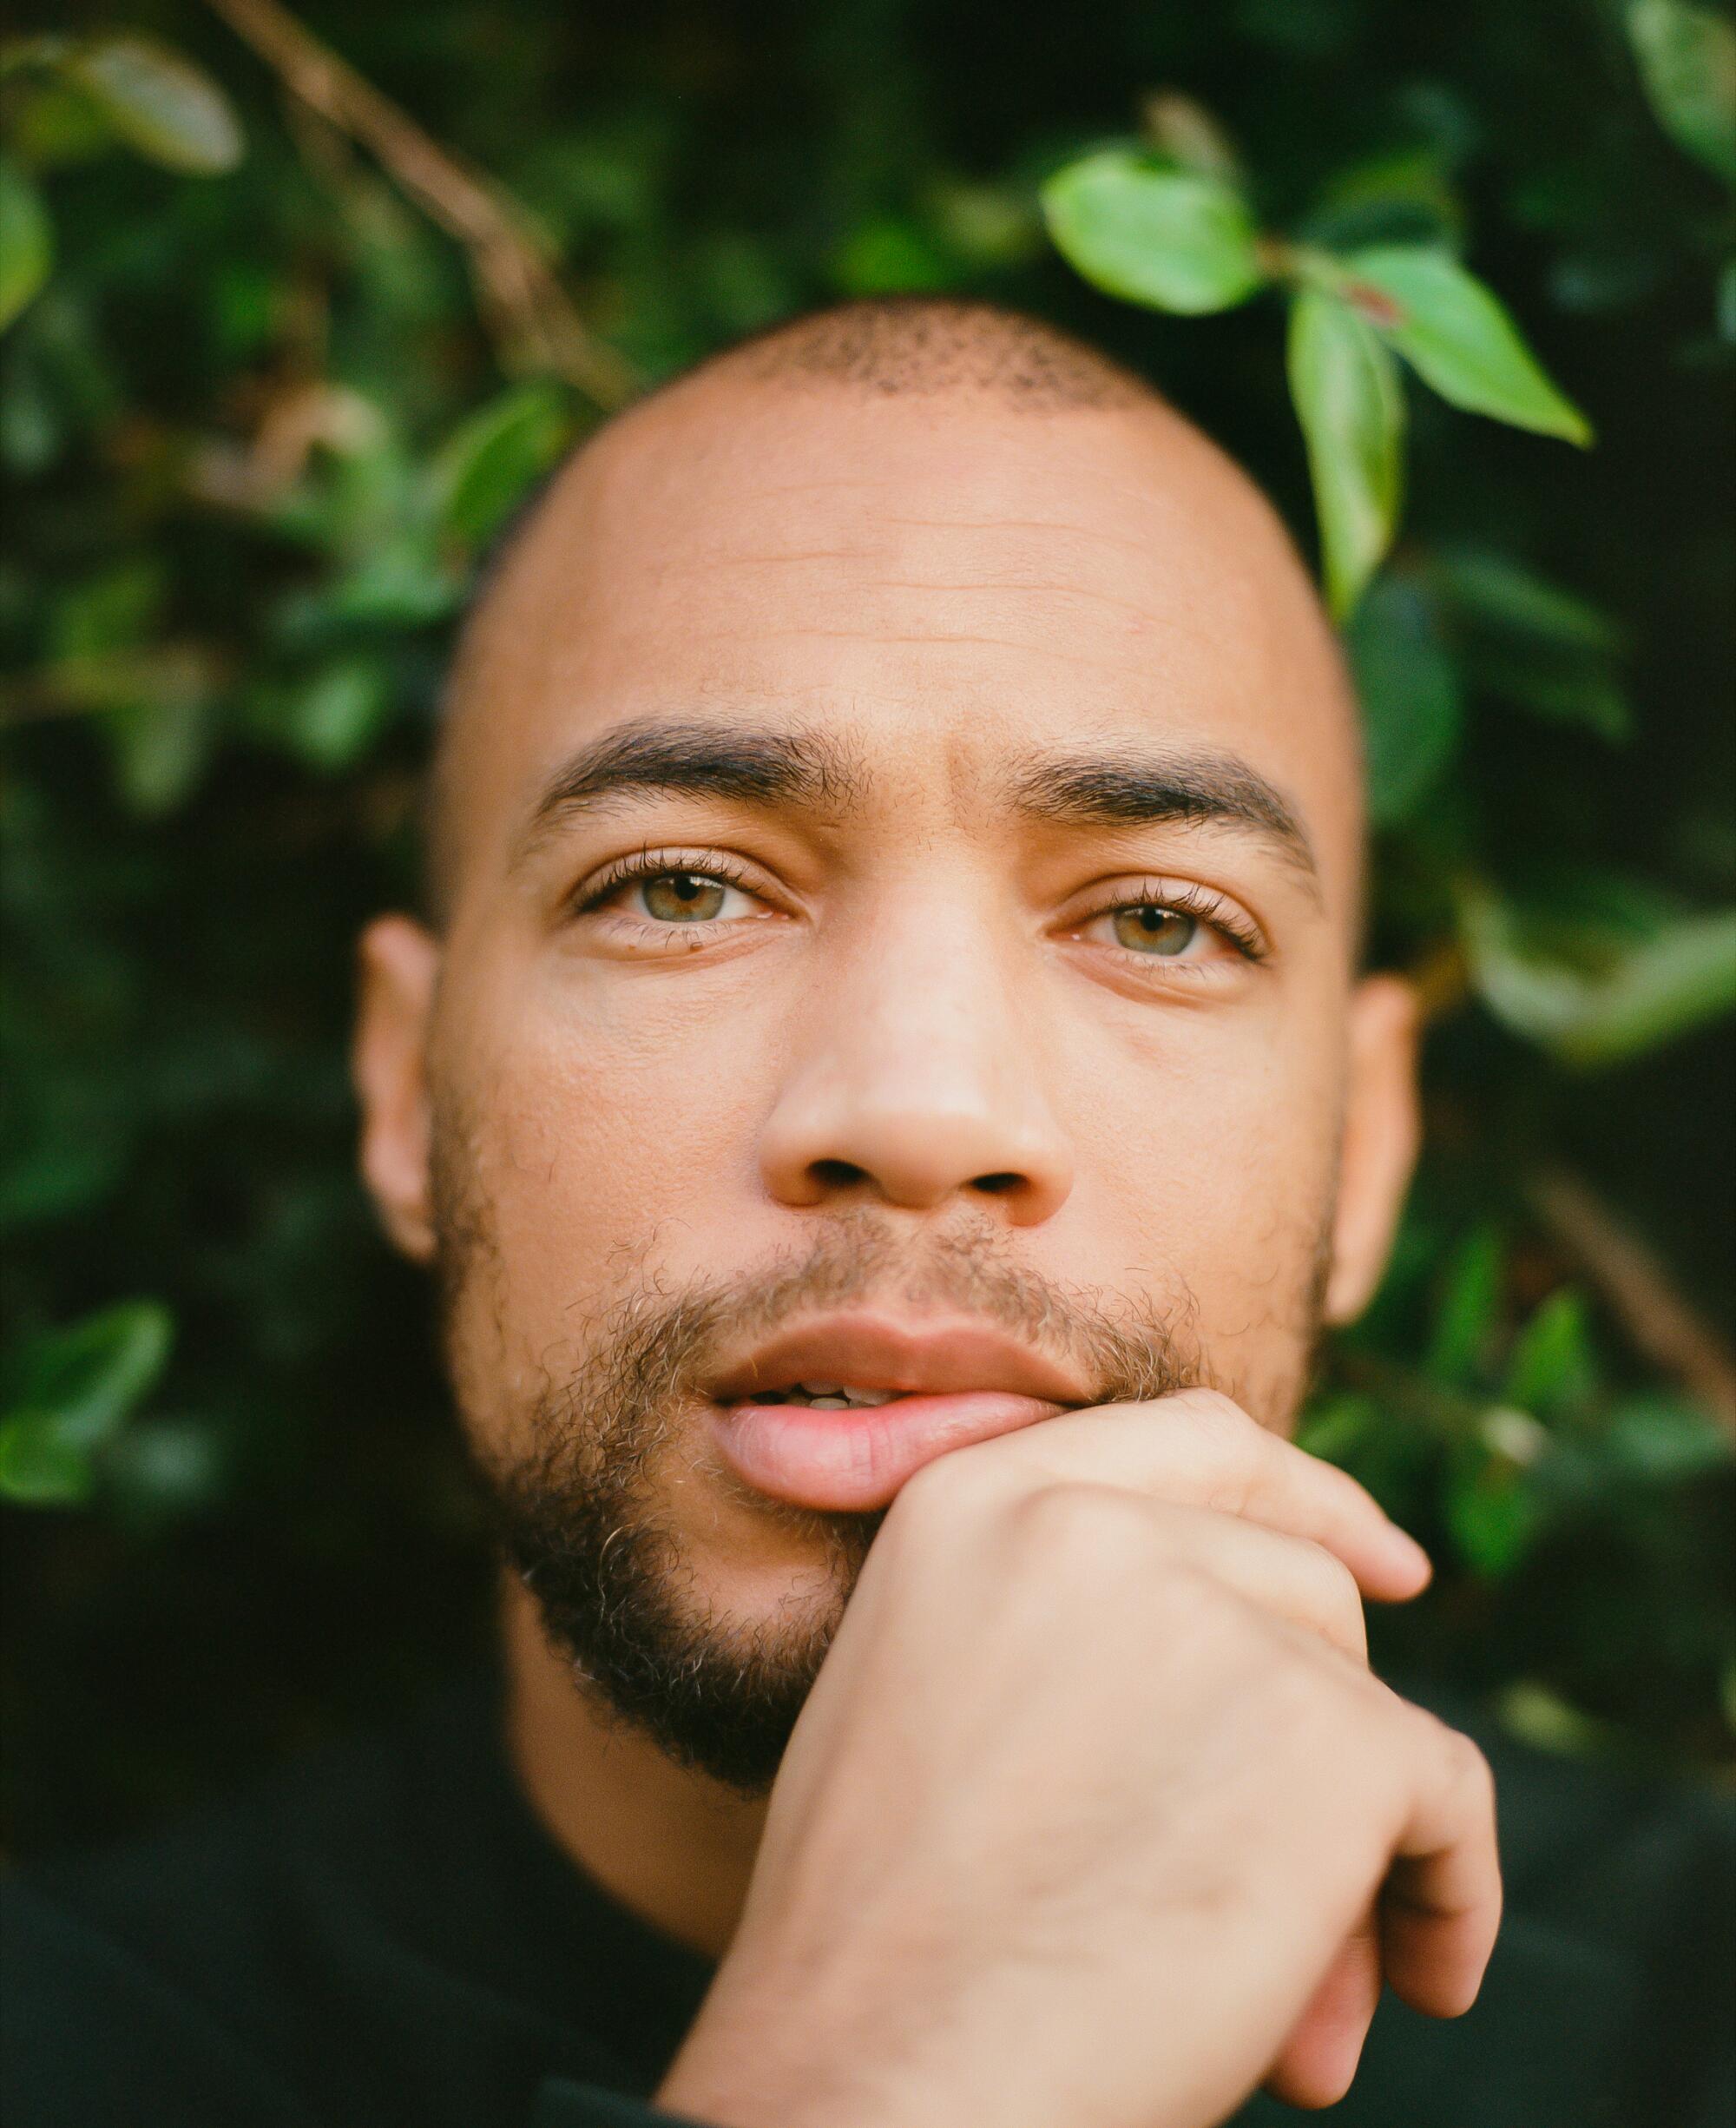 "I know my purpose. I knew it young, and it set me on this course," Kendrick Sampson writes.